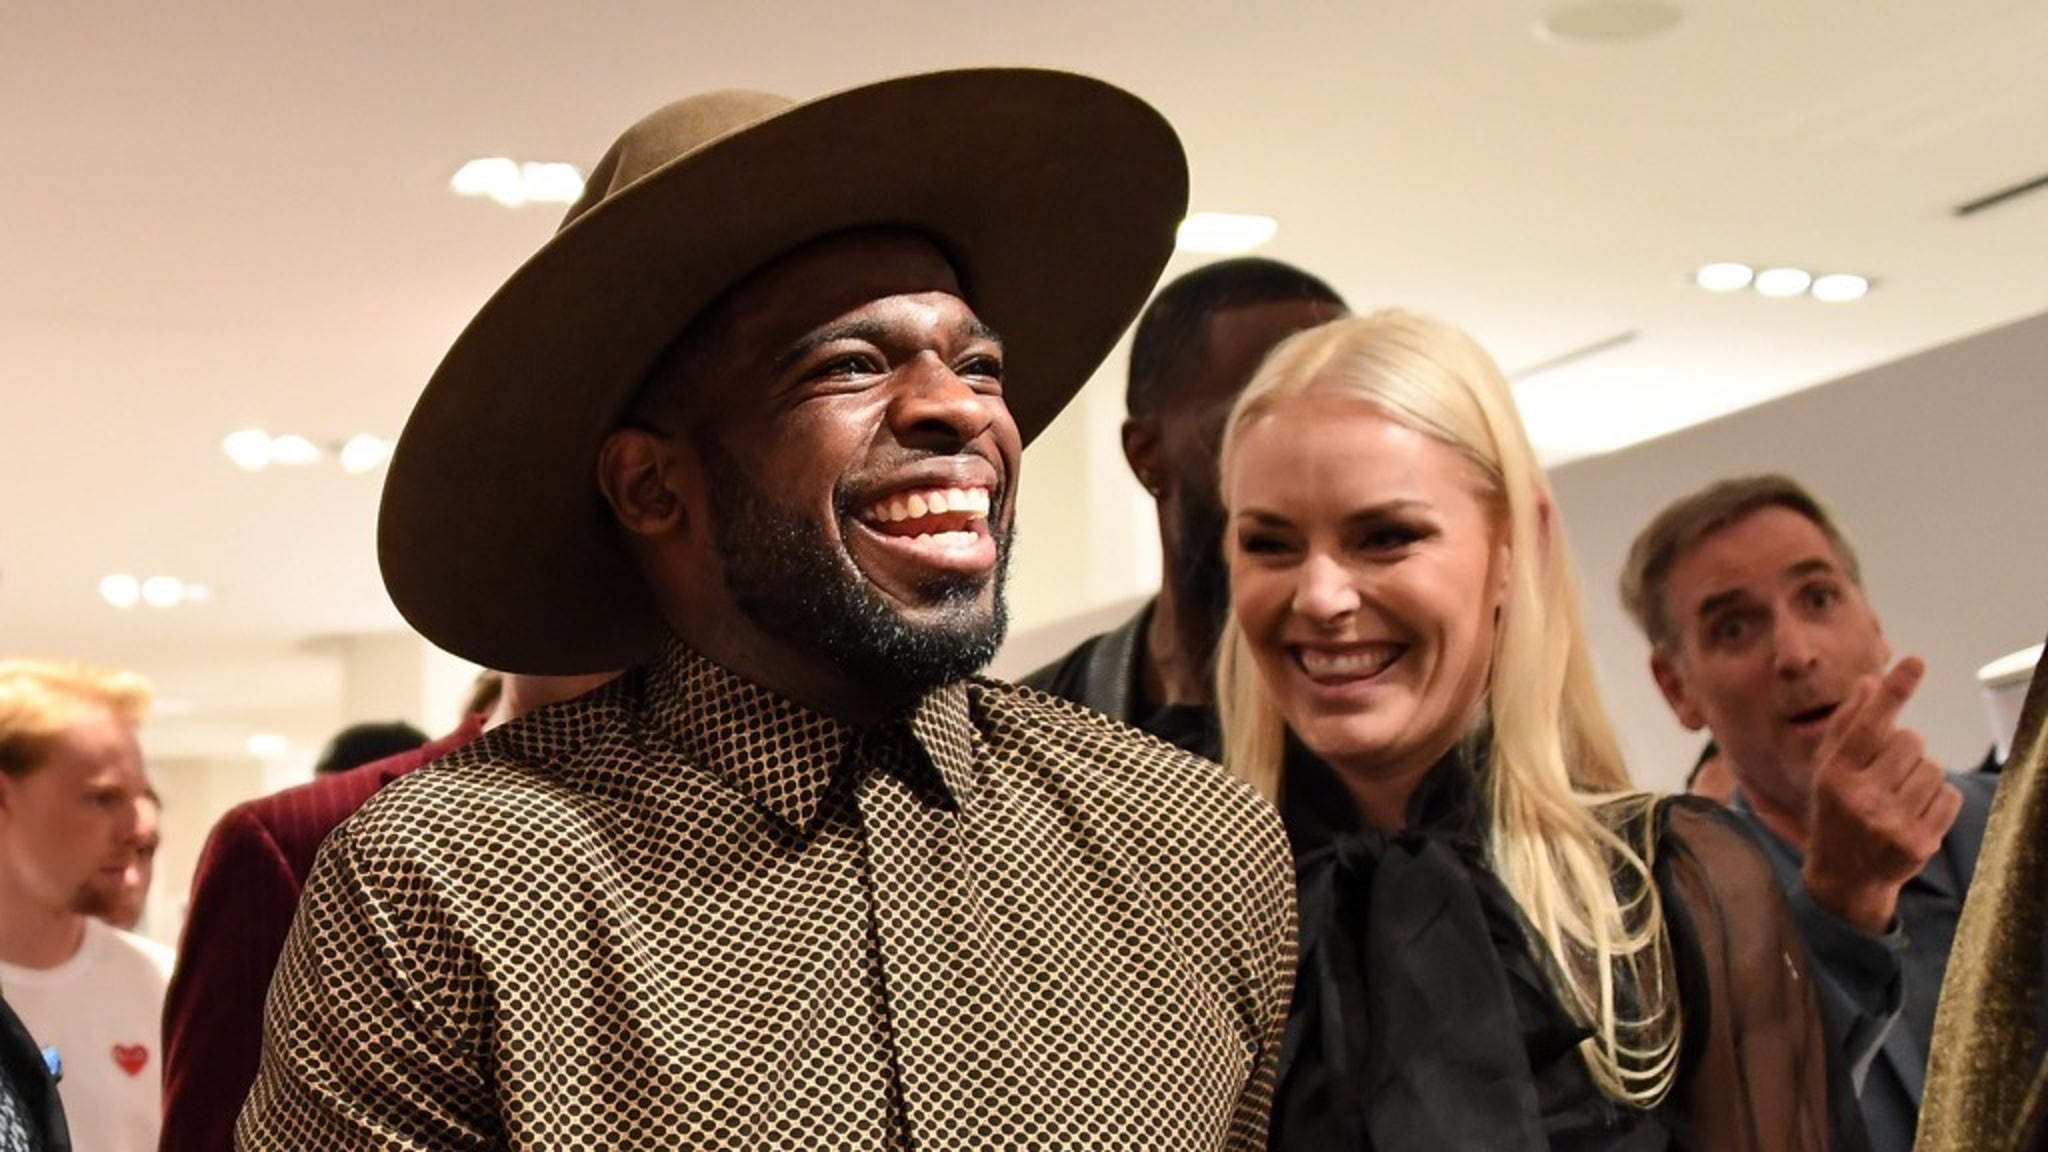 Lindsey Vonn And P.K. Subban Together